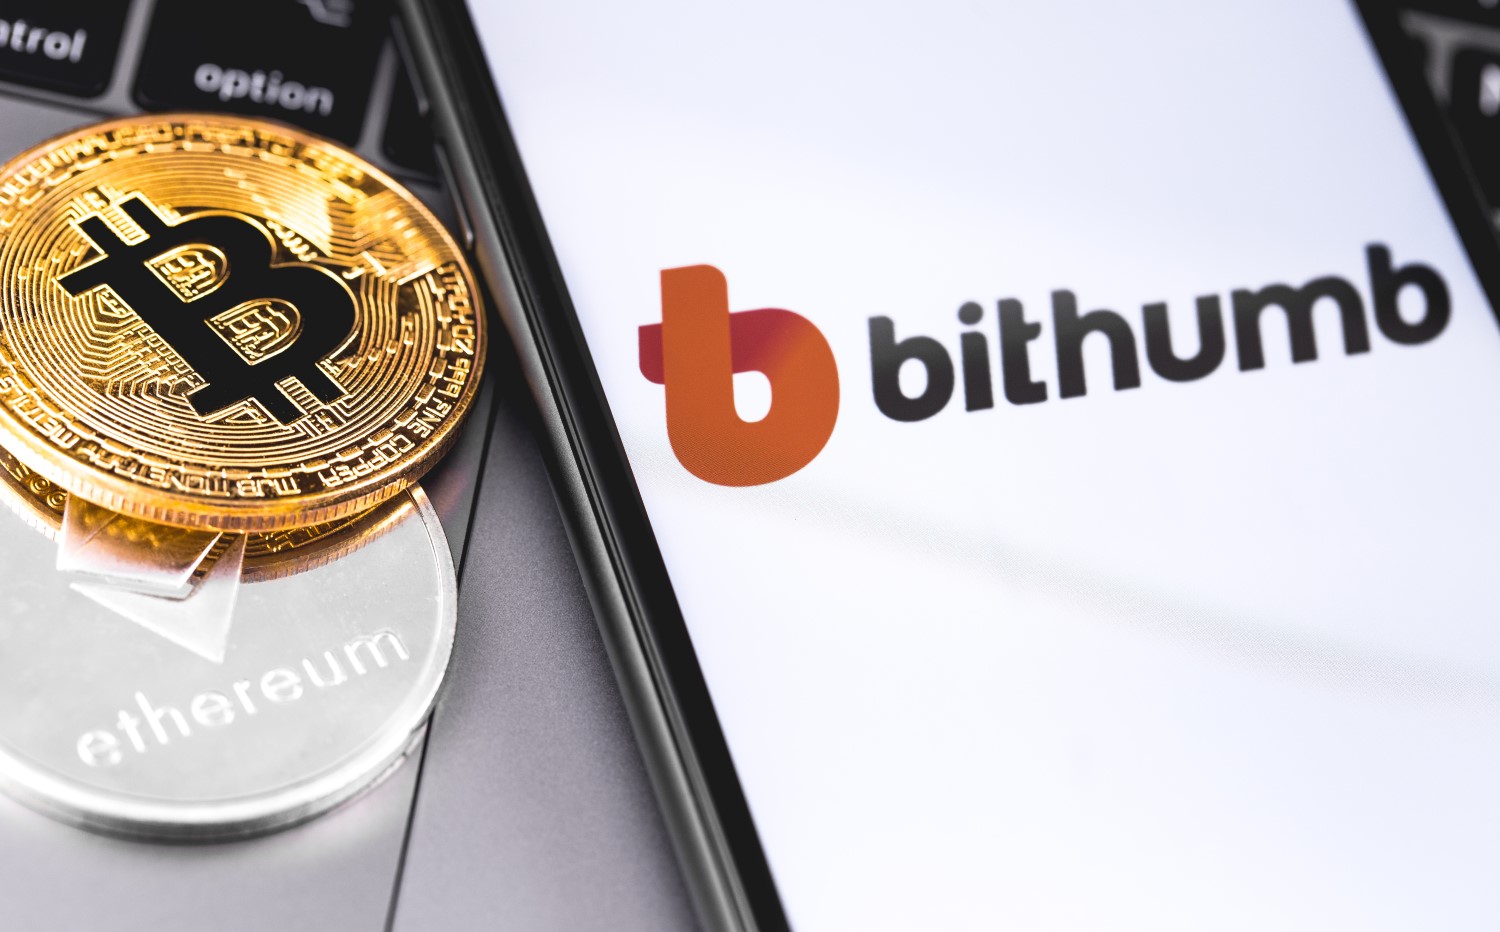 Police Reportedly Raid Headquarters of Bithumb, South Korea’s Largest Change